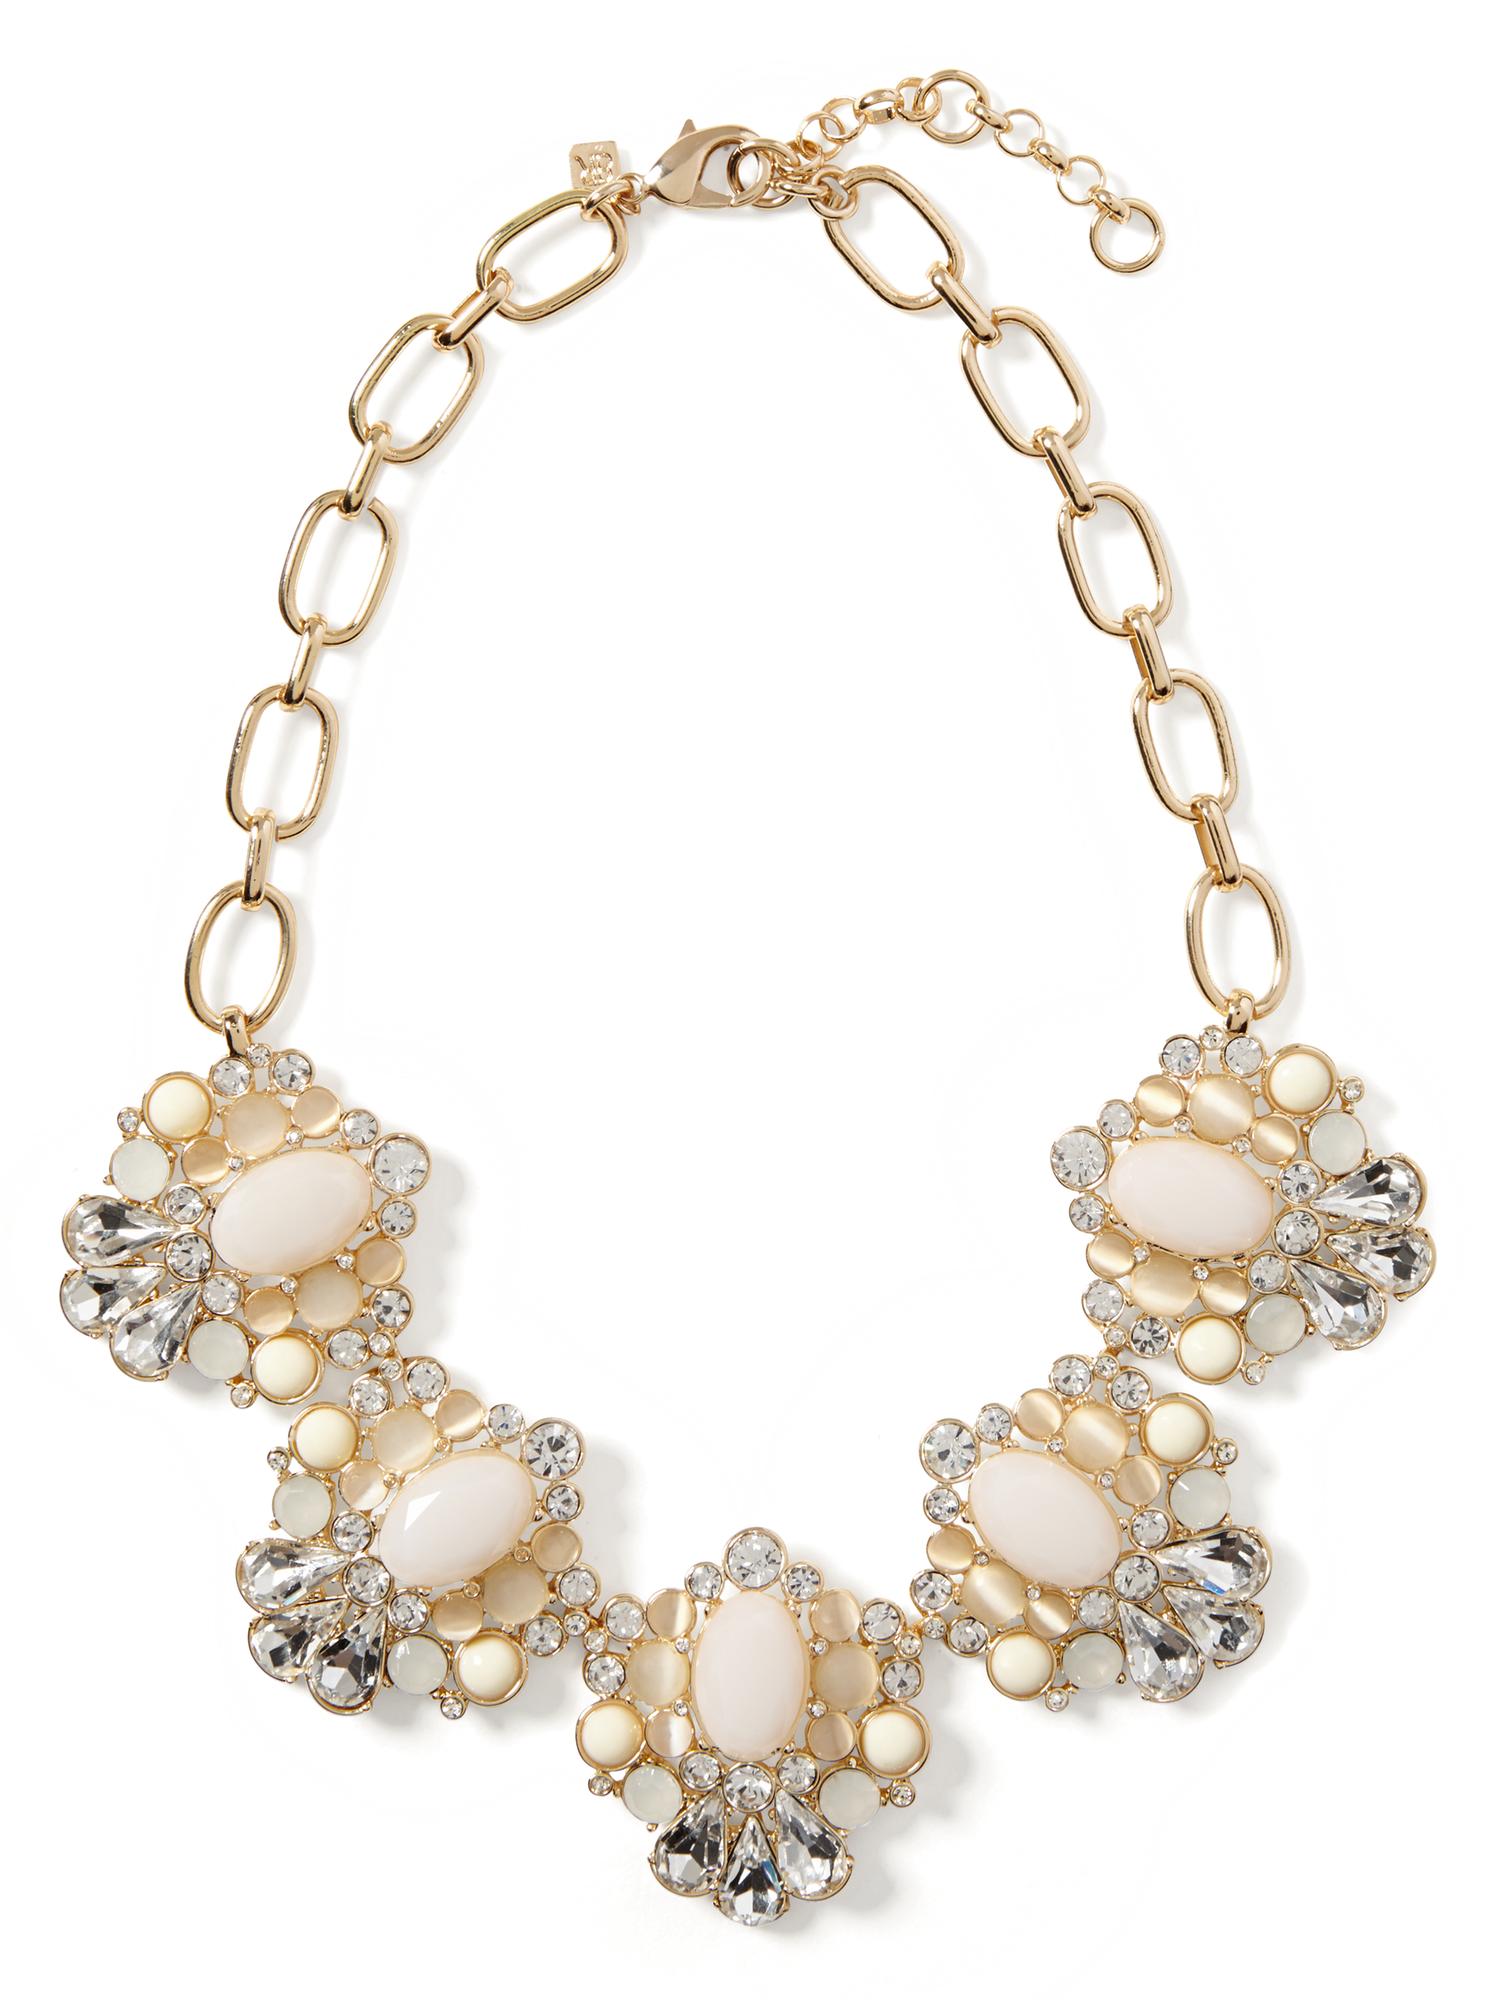 Shimmer Chic Floral Necklace